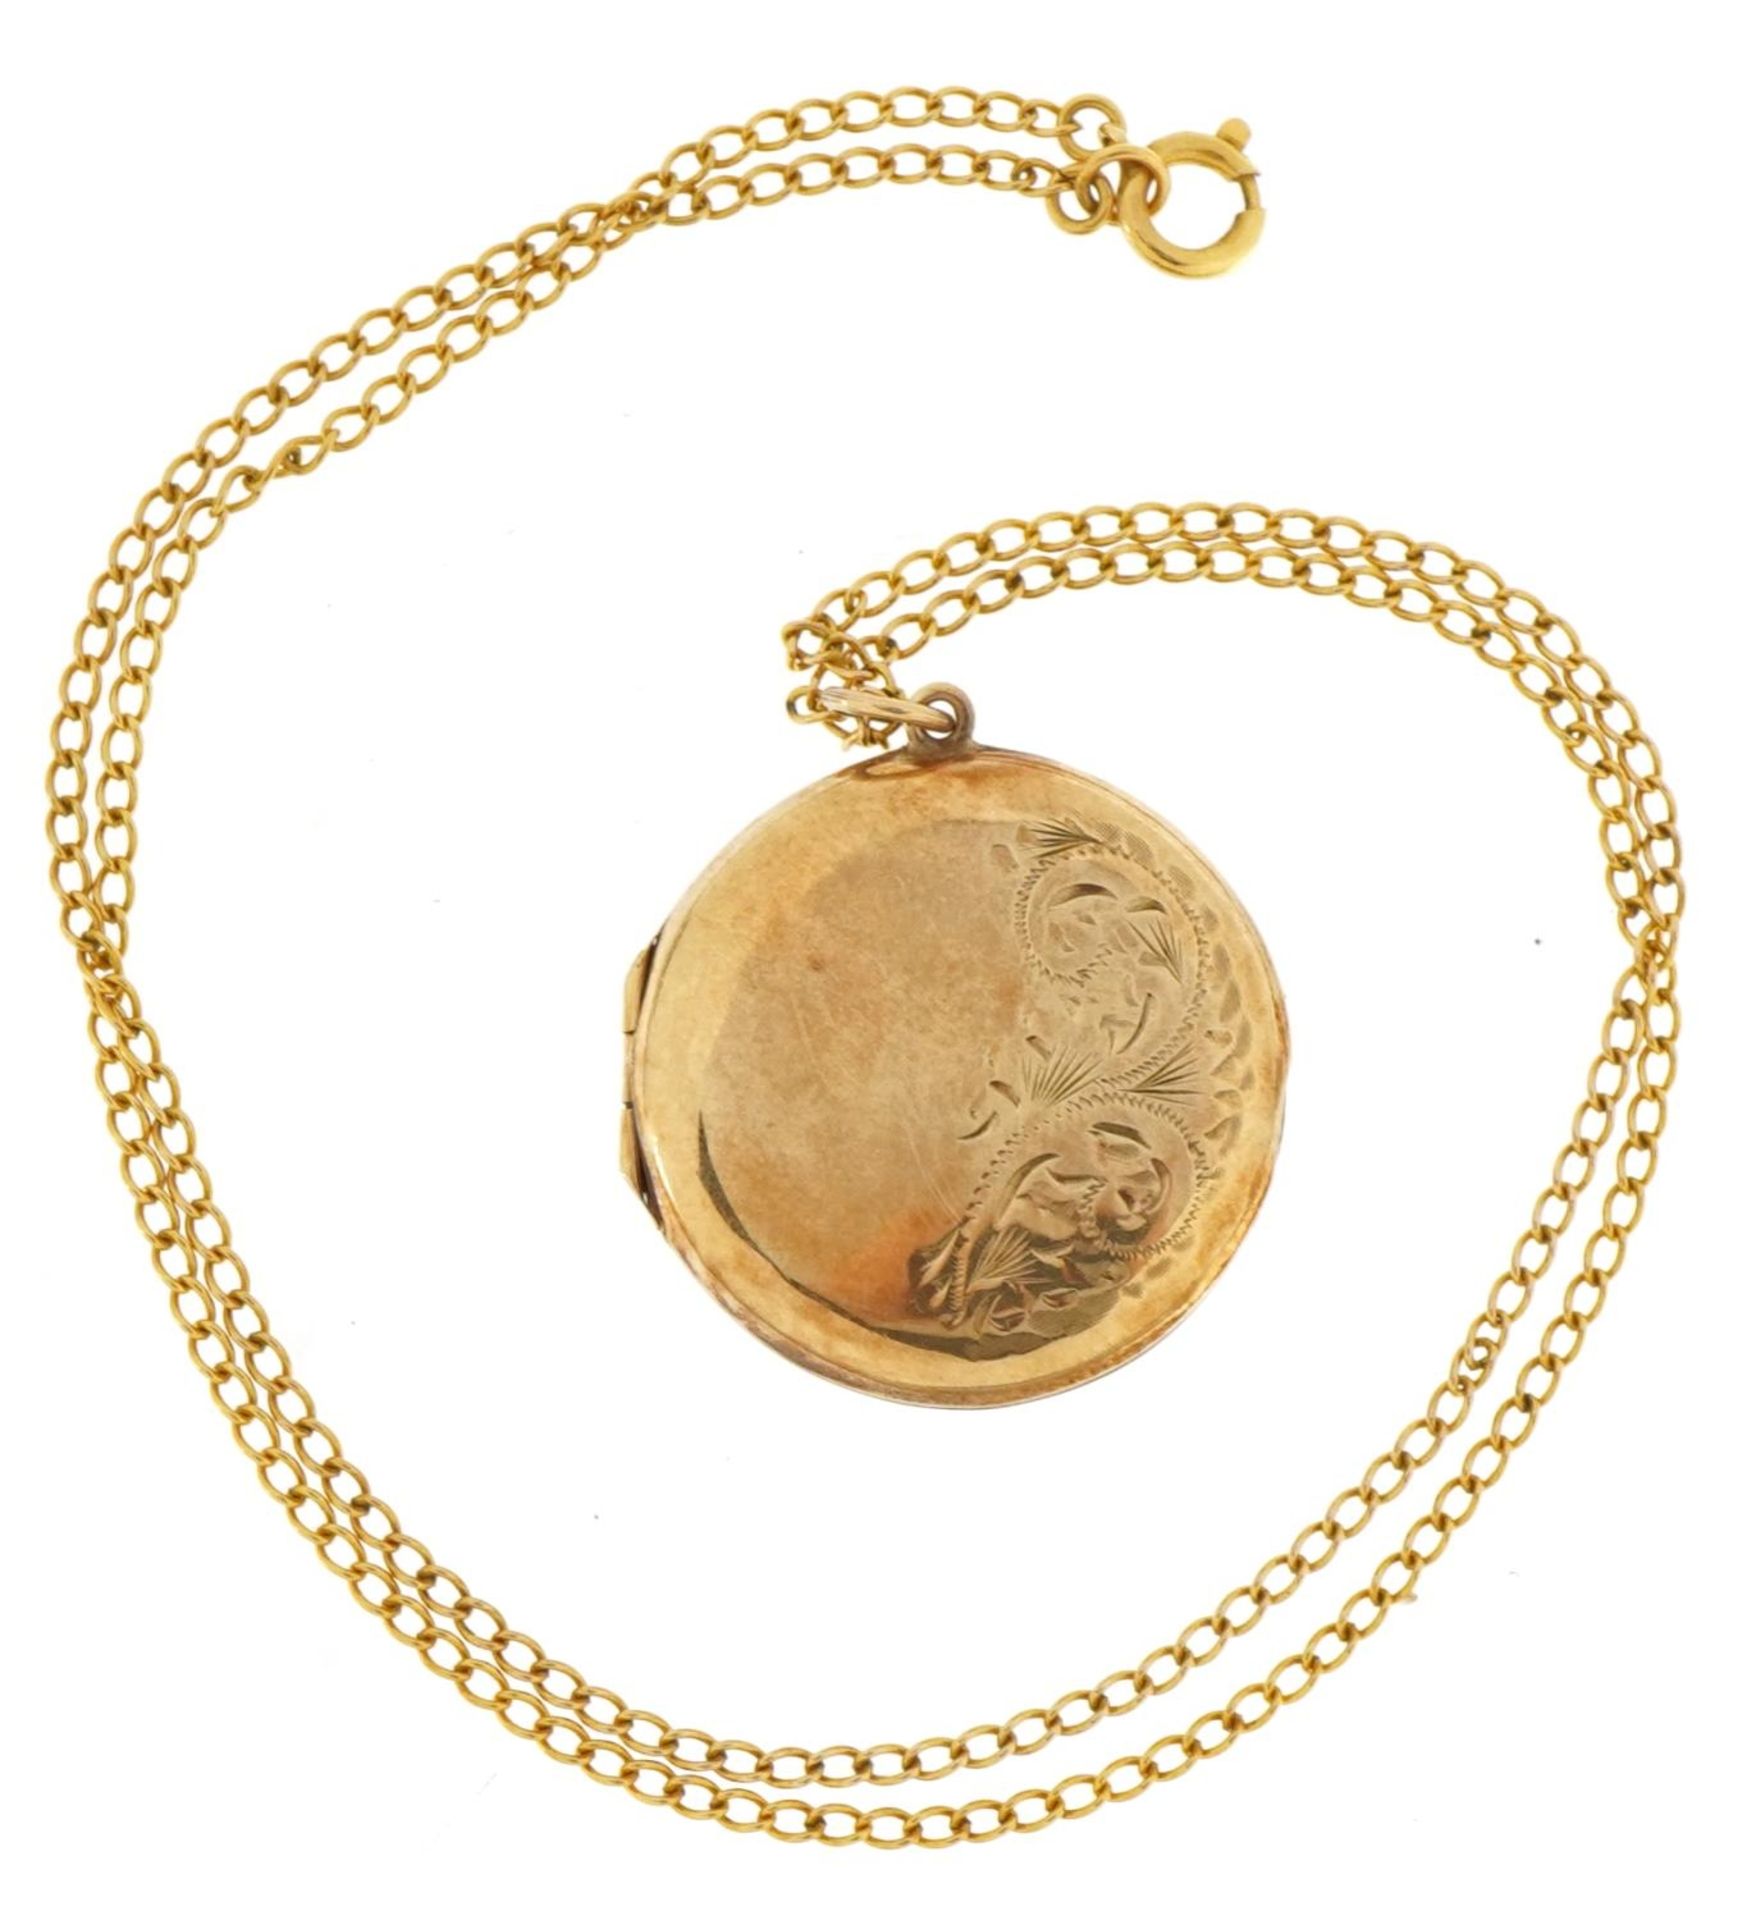 Circular 9ct gold locket with engraved decoration on a 9ct gold curb link necklace, 3.2cm high and - Bild 4 aus 6